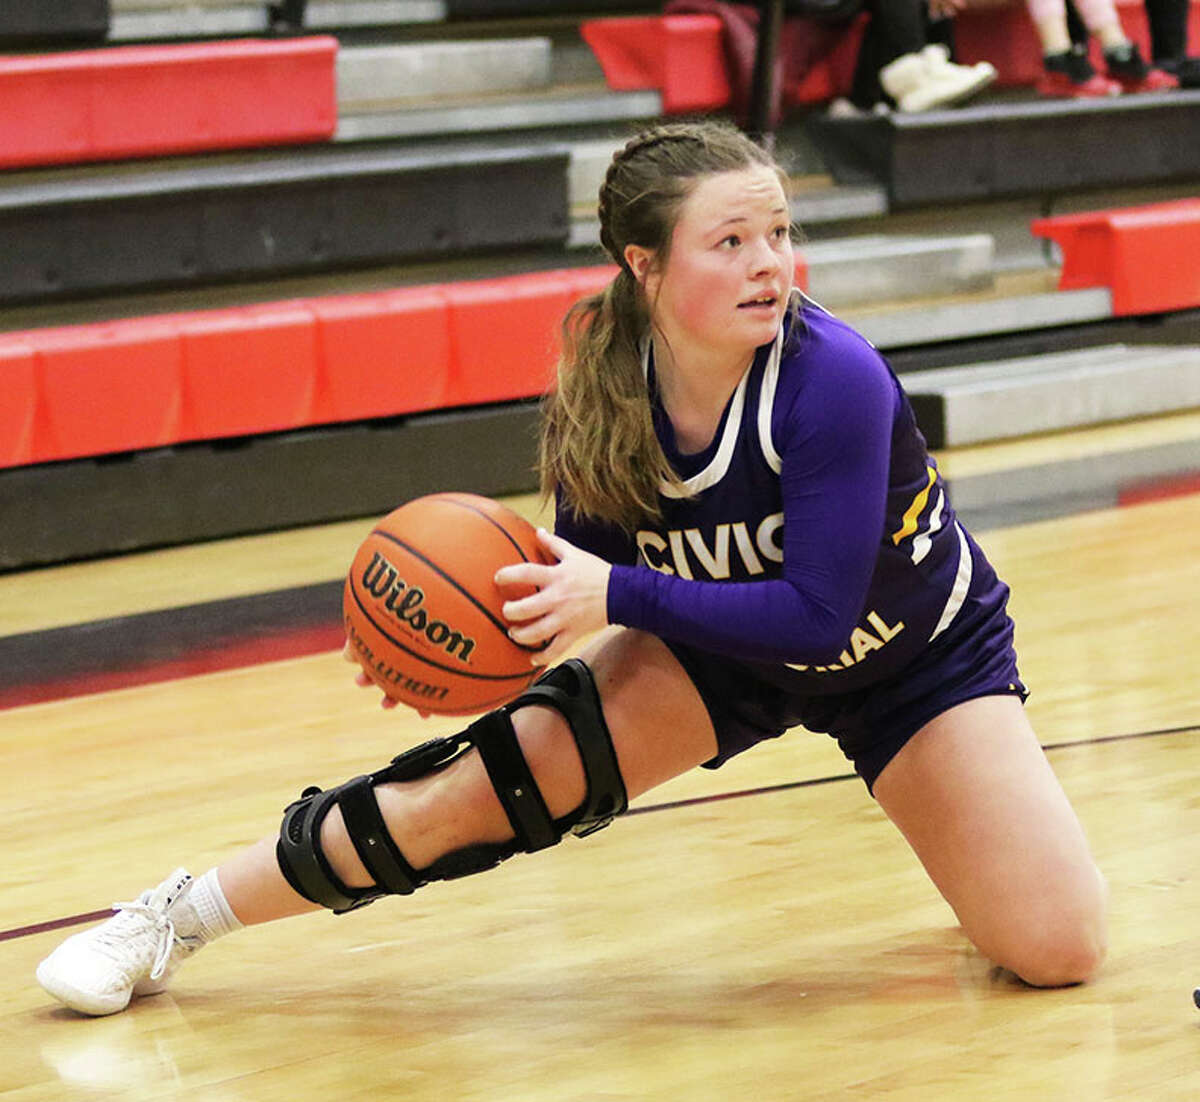 CM's Aubree Wallace looks for a teammate after retrieving a loose ball after making a backcourt steal against the Bulldogs in a MVC girls basketball game Dec. 19 in Highland.